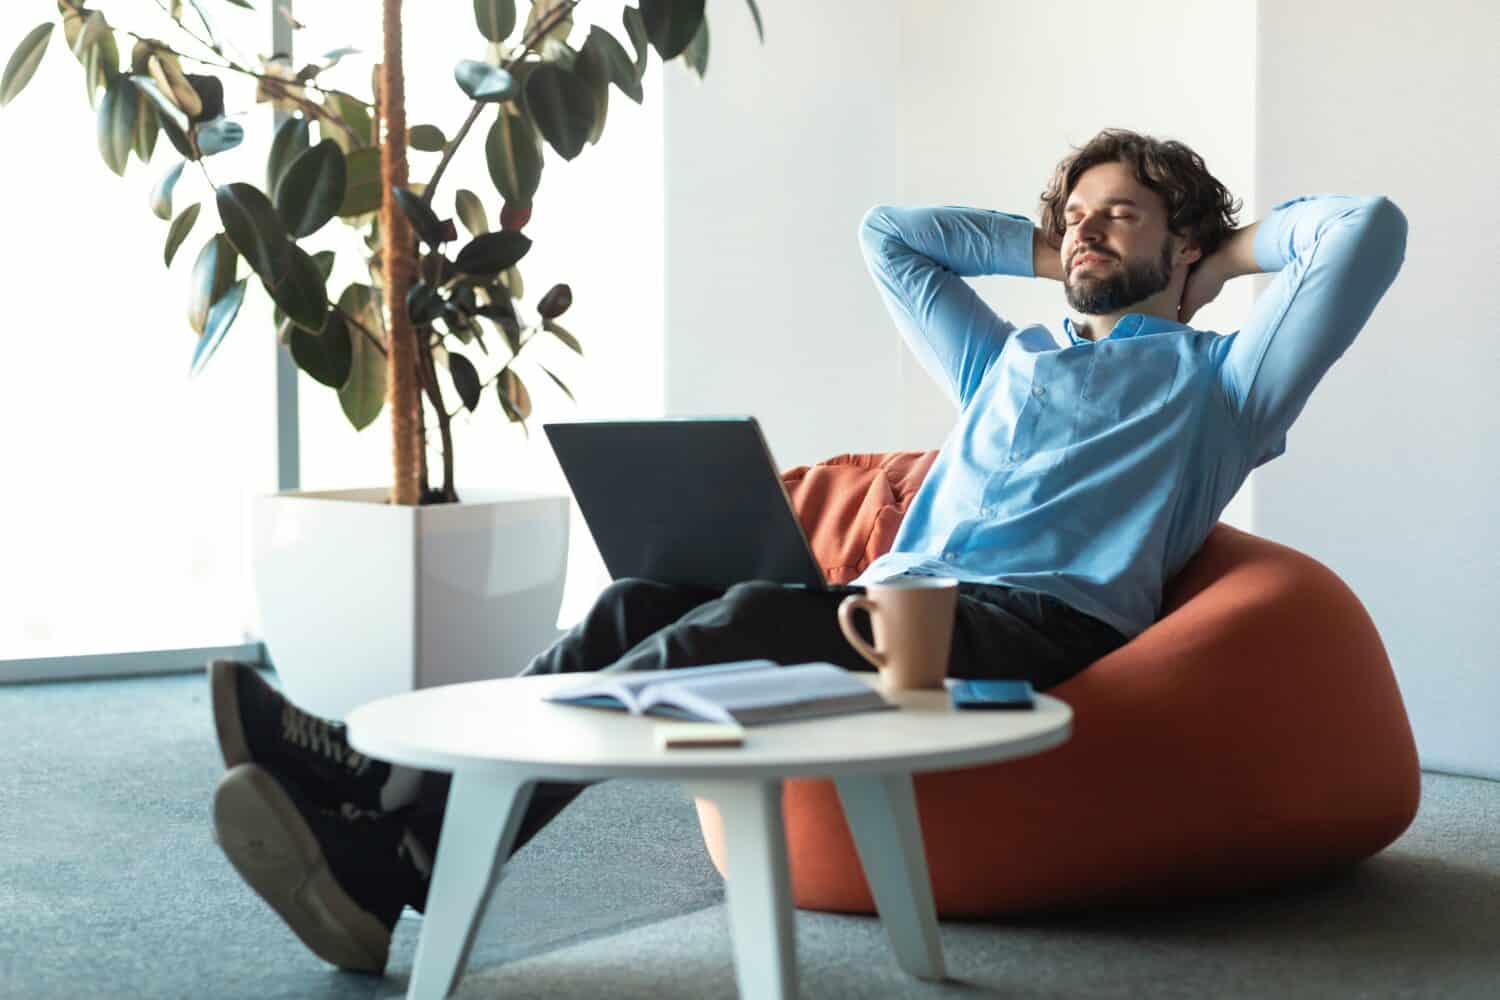 Taking Break From Work. Smiling business man relaxing on beanbag sitting on pouf chair and resting, happy male leaning back at workplace, cheerful guy with closed eyes holding hands behind head